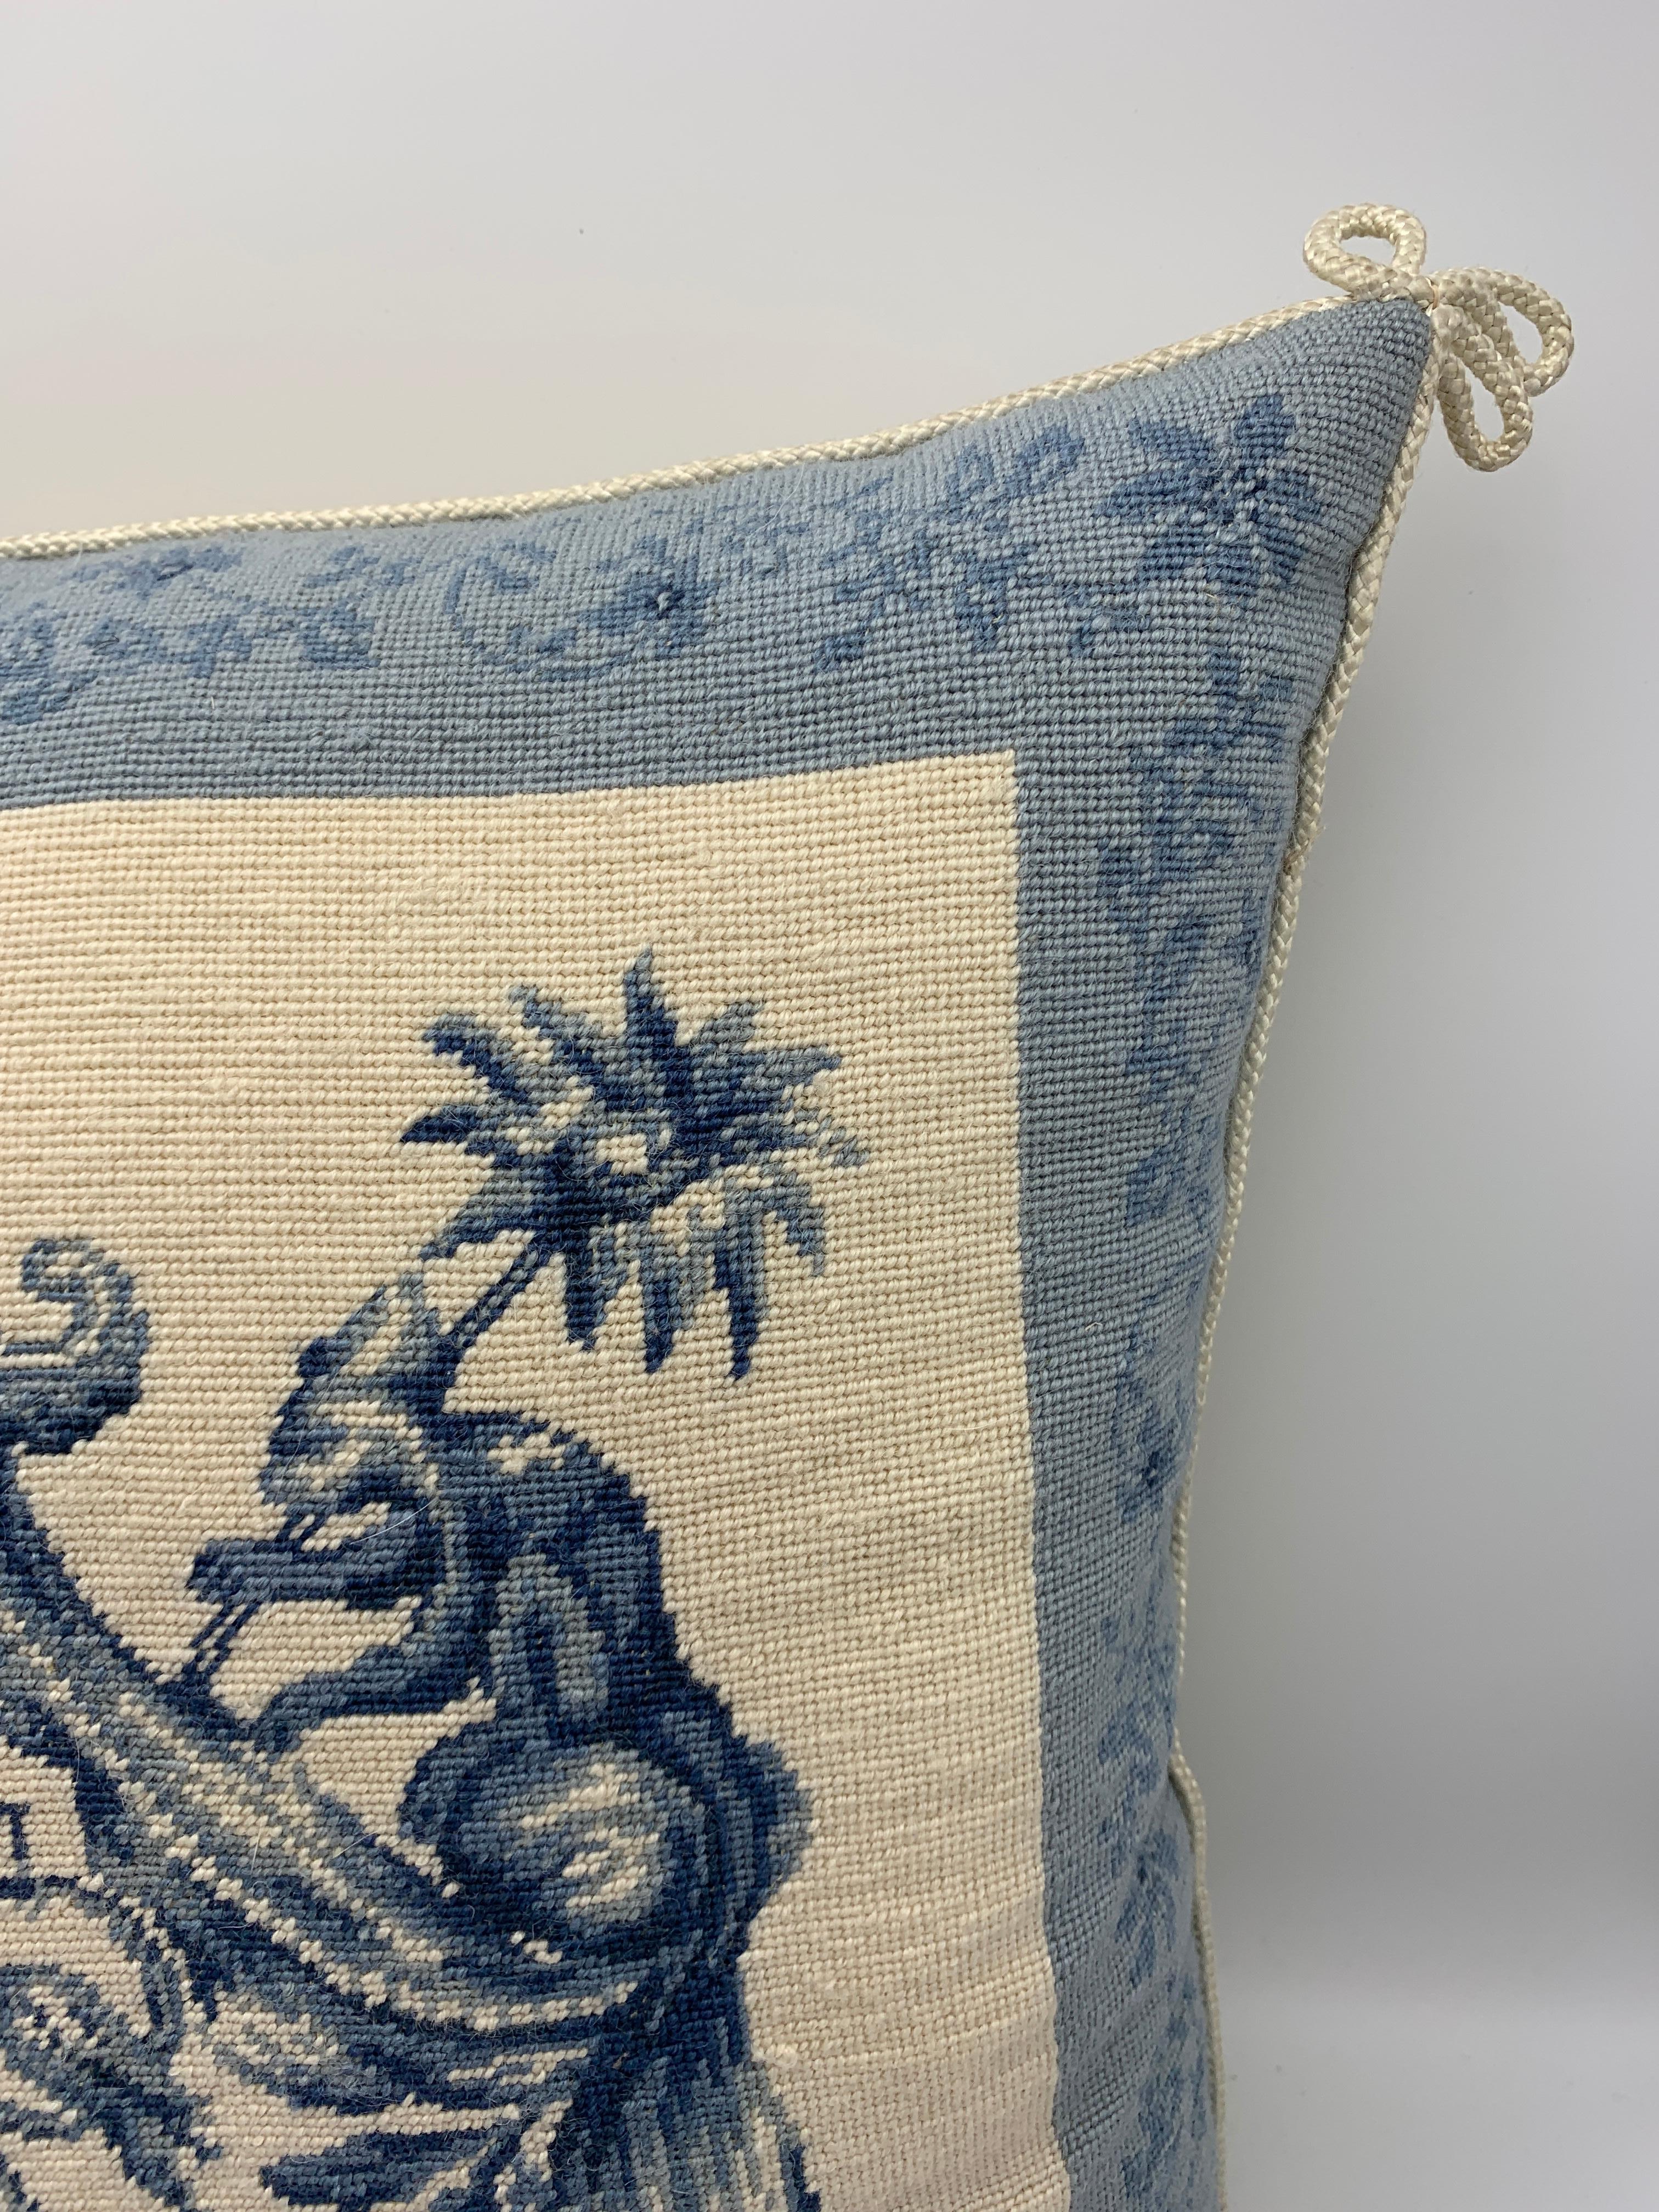 Chinoiserie Blue and White Pagoda Needlepoint Pillow, 1970s For Sale 3